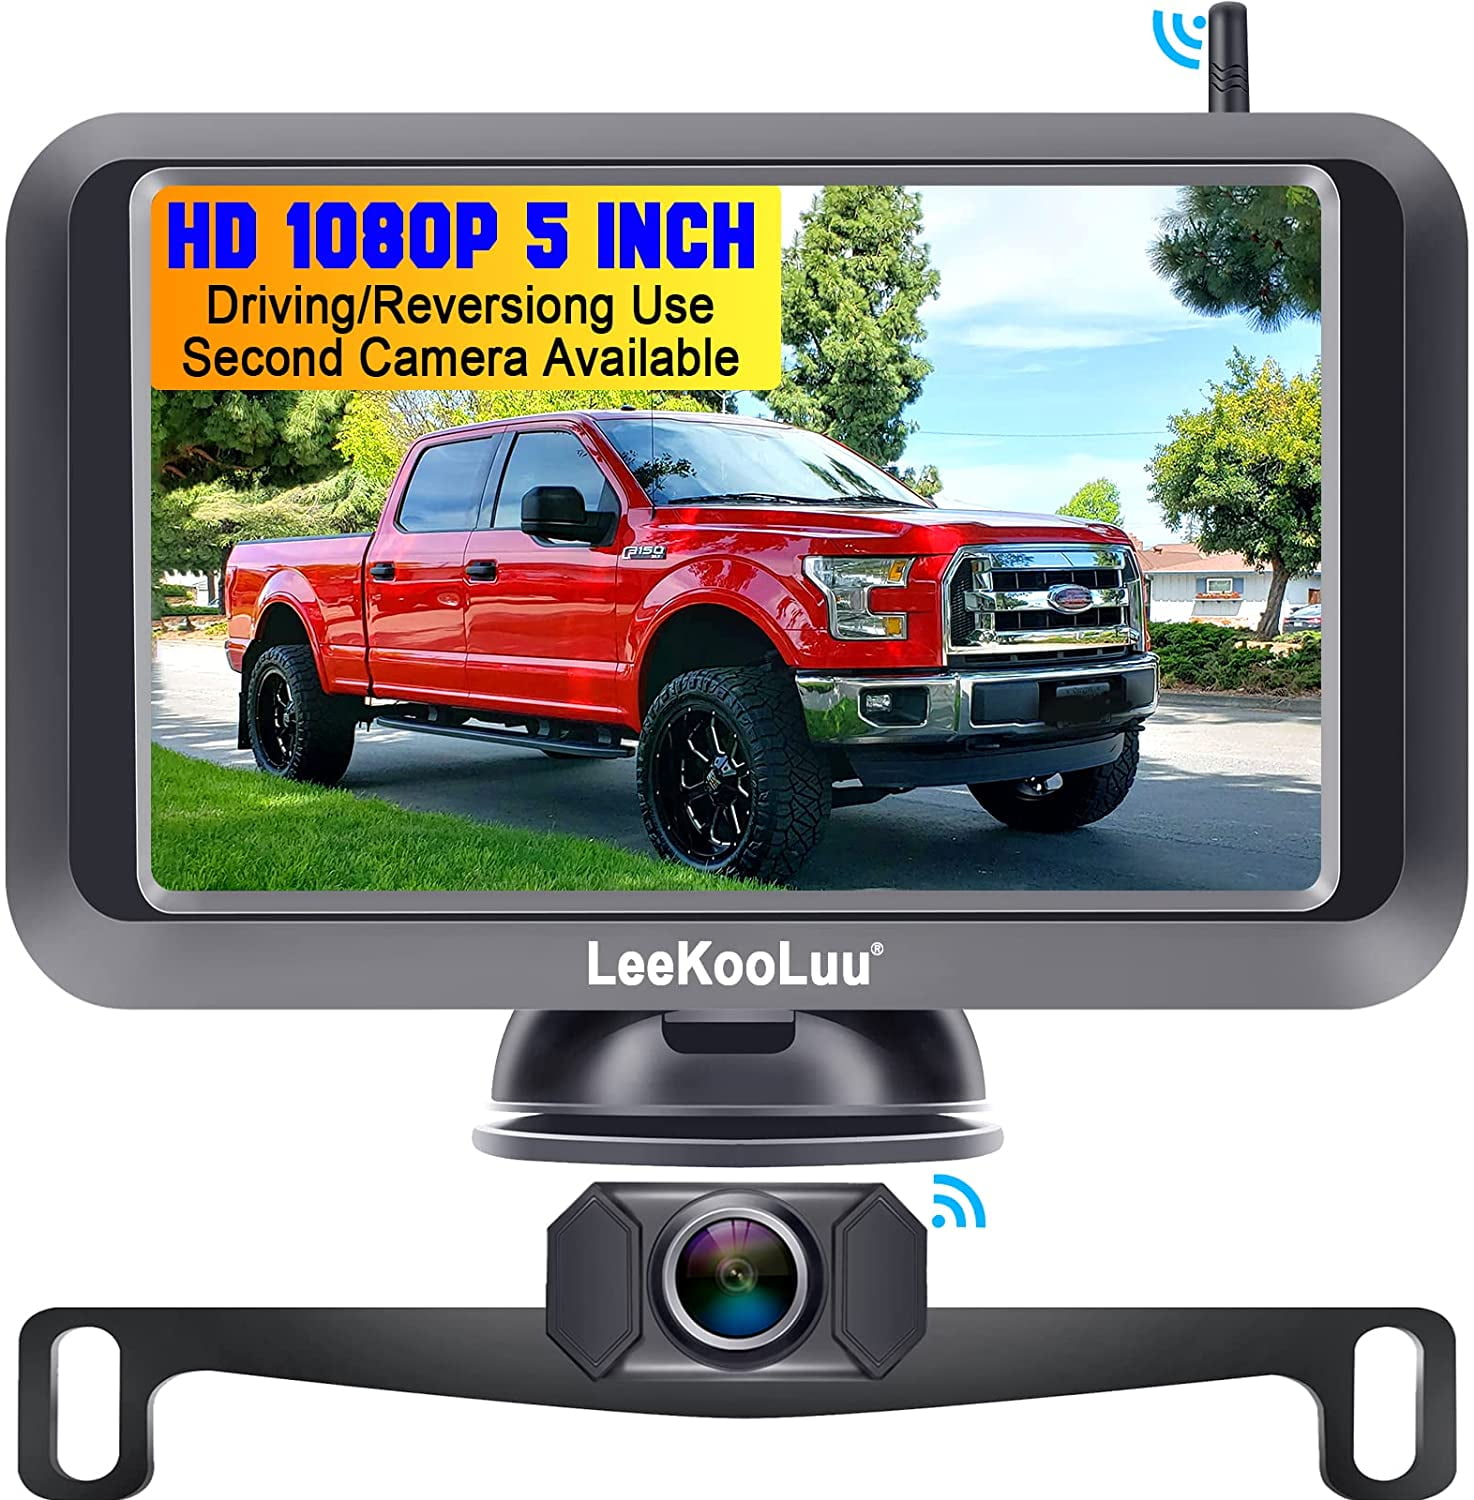 LeeKooLuu Backup Camera with 4.3 Monitor High-Speed Observation System Super Night Vision HD Color Rear/Front View for Cars/Pickups/Trucks/RVs/Vans Easy Installation 